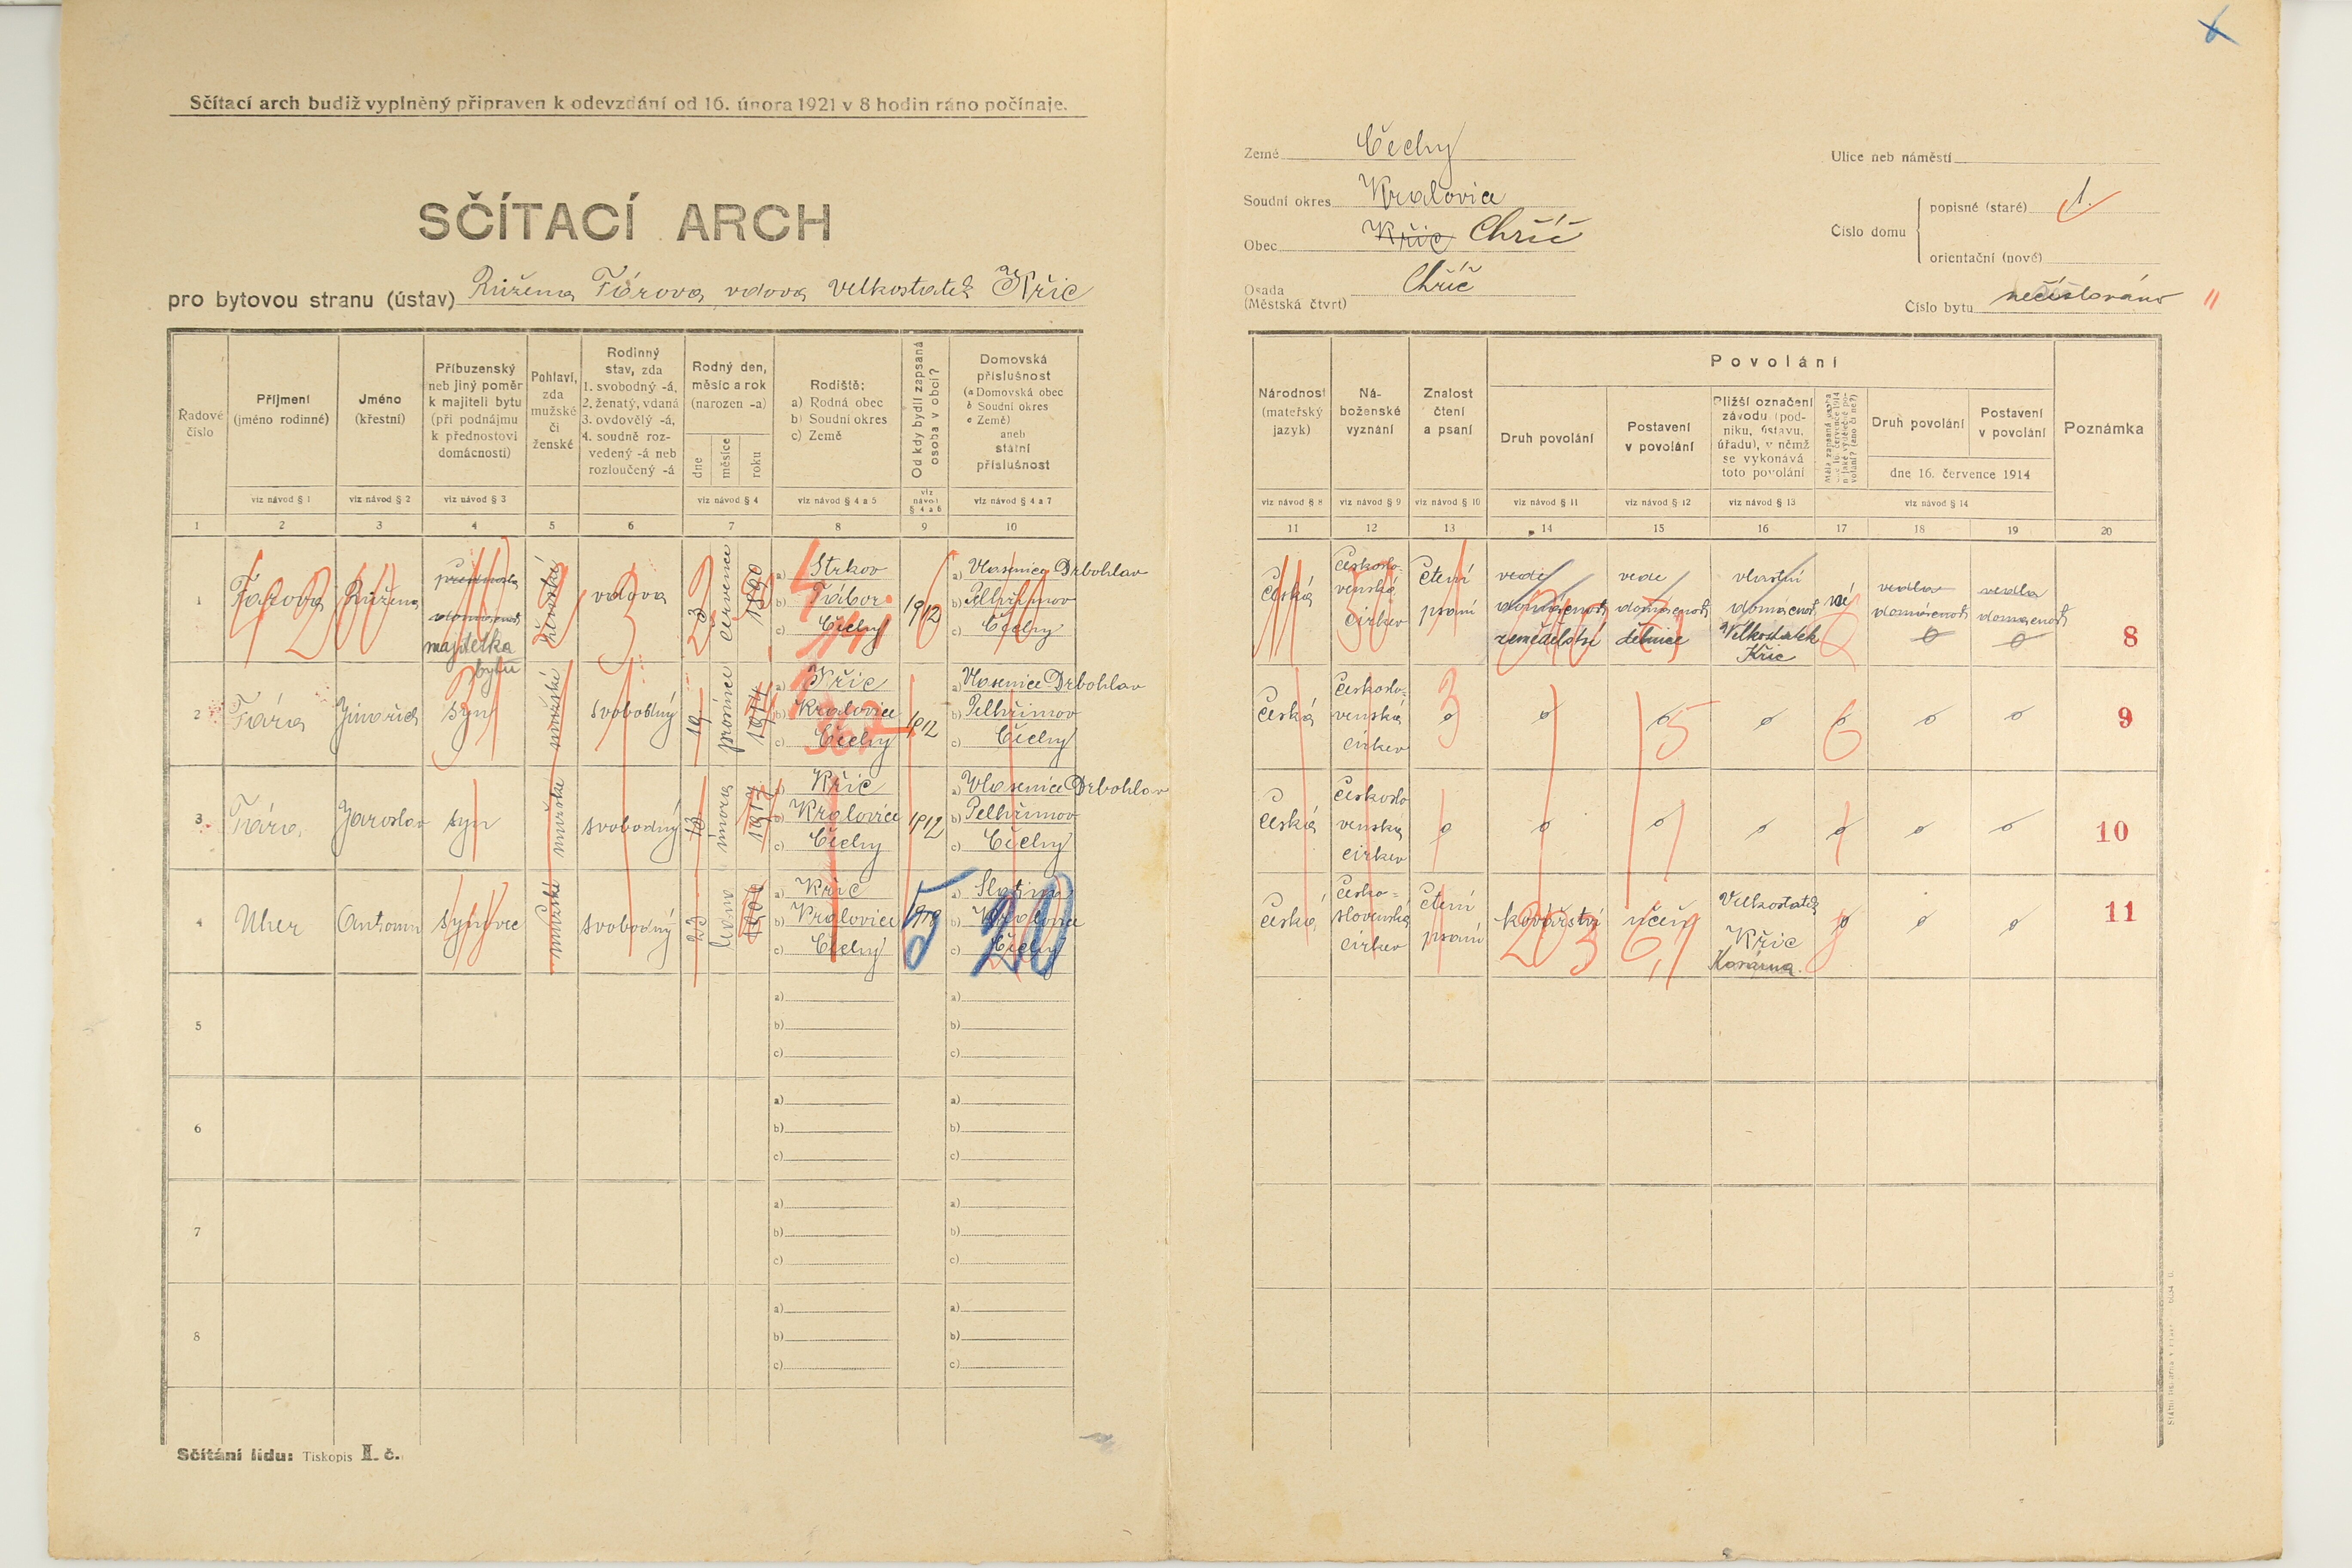 22. soap-ps_00423_census-1921-chric-cp001_0220